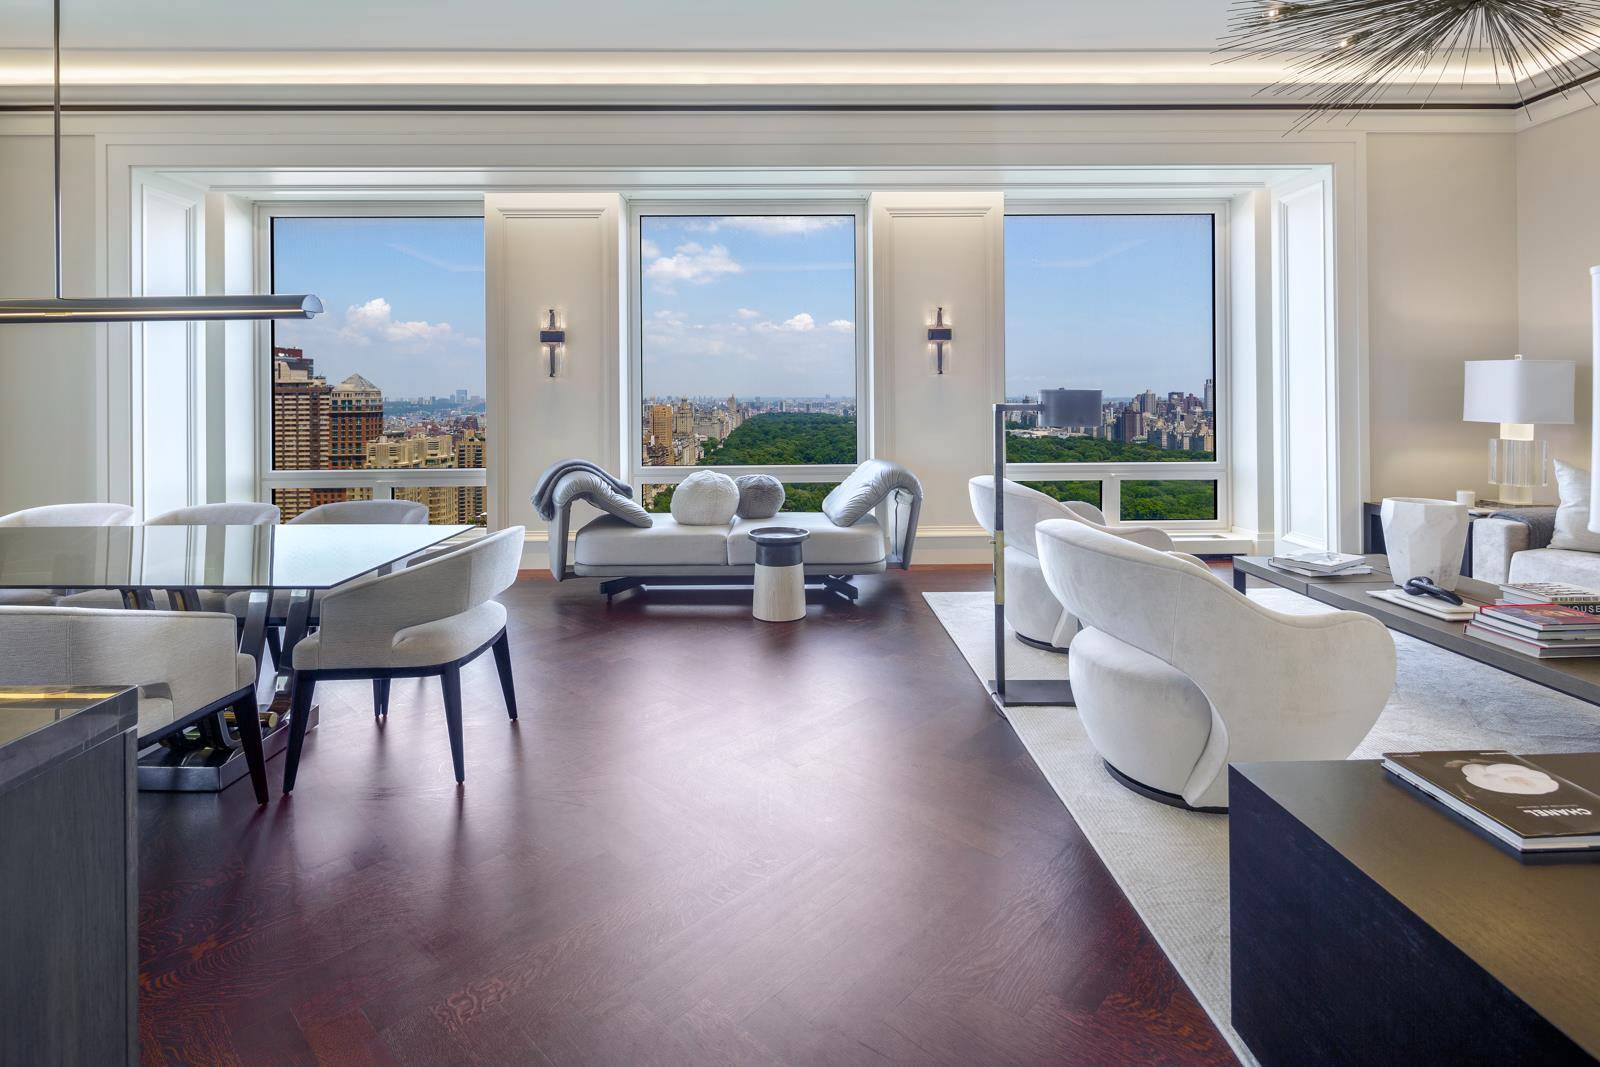 STUNNING FURNISHED RENTAL IMMEDIATE OCCUPANCY220 Central Park South is the preeminent new address in New York, situated directly on Central Park.